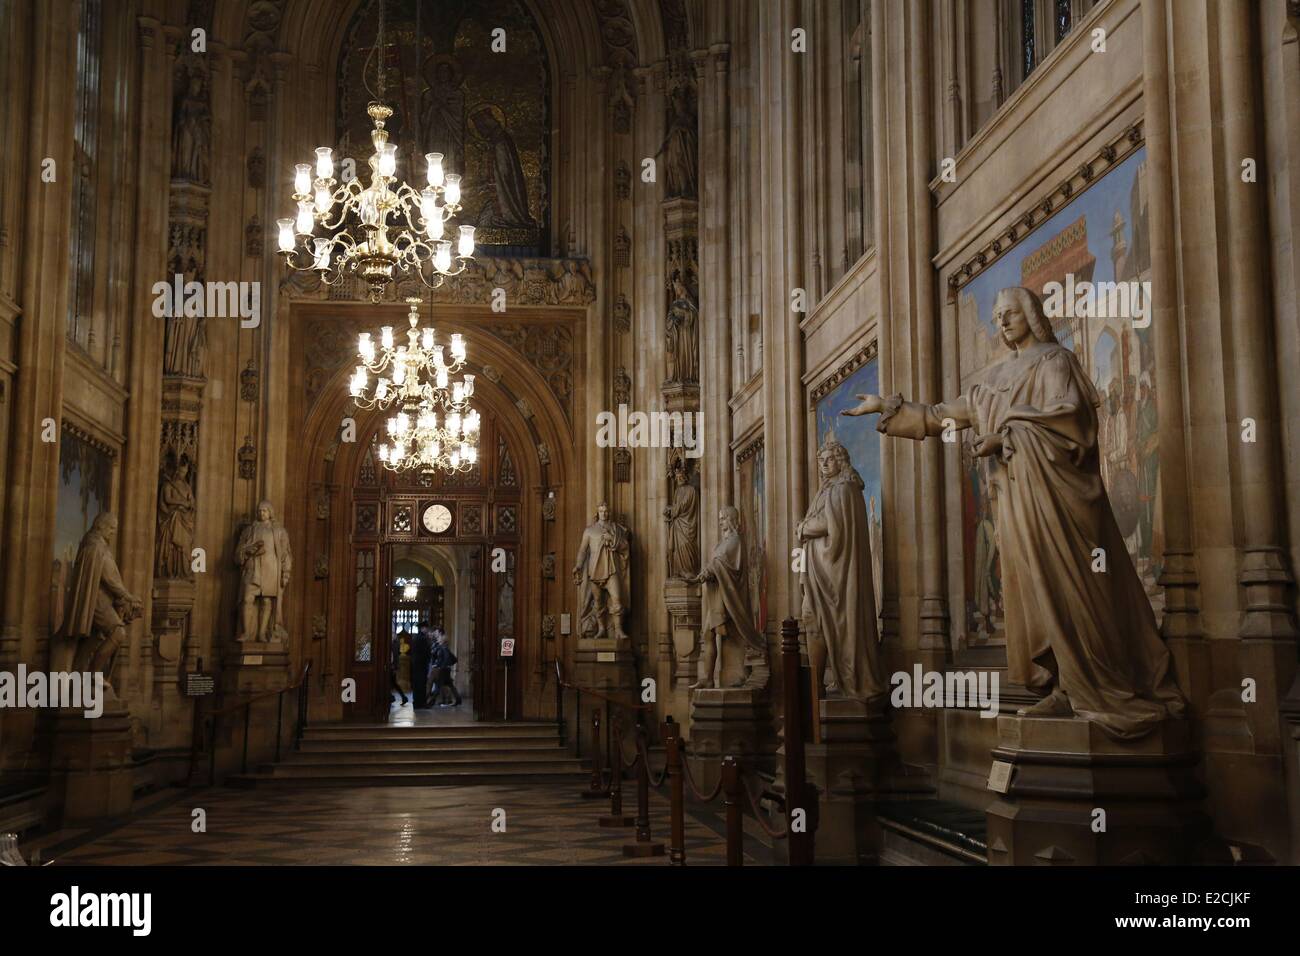 United Kingdom, London, Westminster, House of Parliaments, commons parliament interior Stock Photo